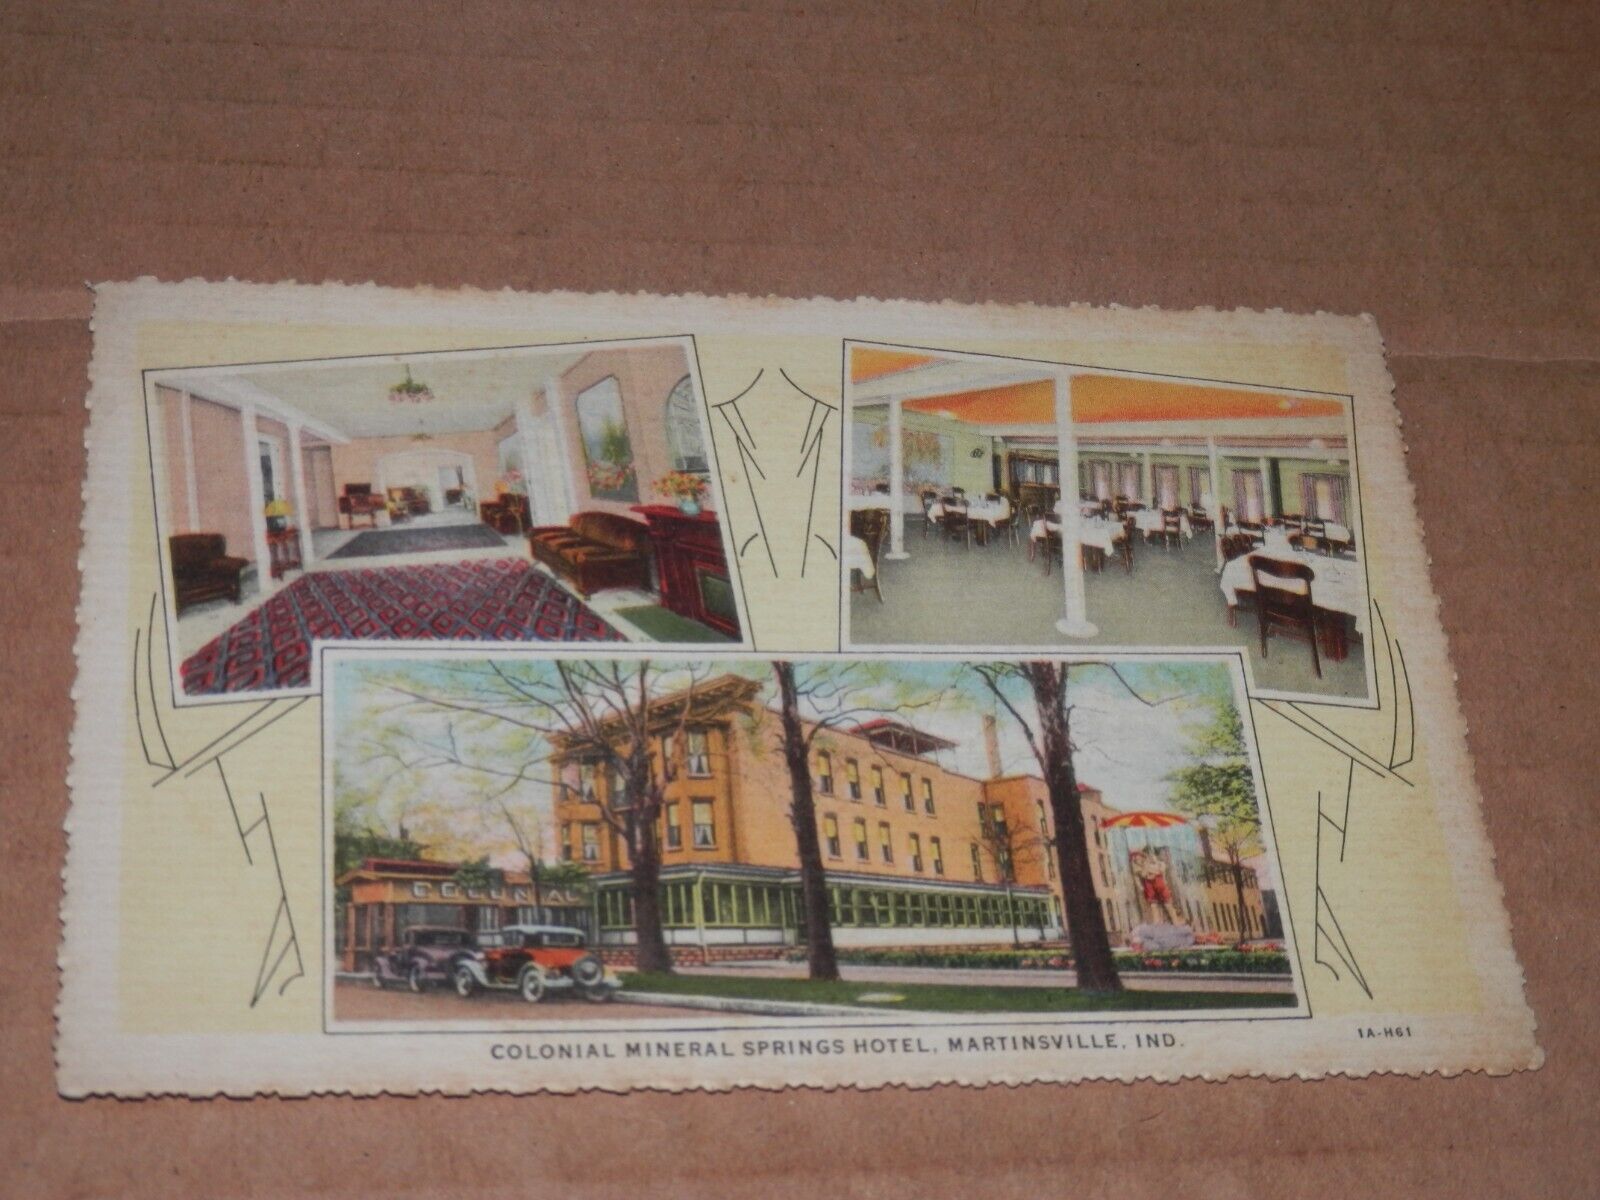 MARTINSVILLE INDIANA - 1935 POSTCARD - COLONIAL MINERAL SPRINGS HOTEL